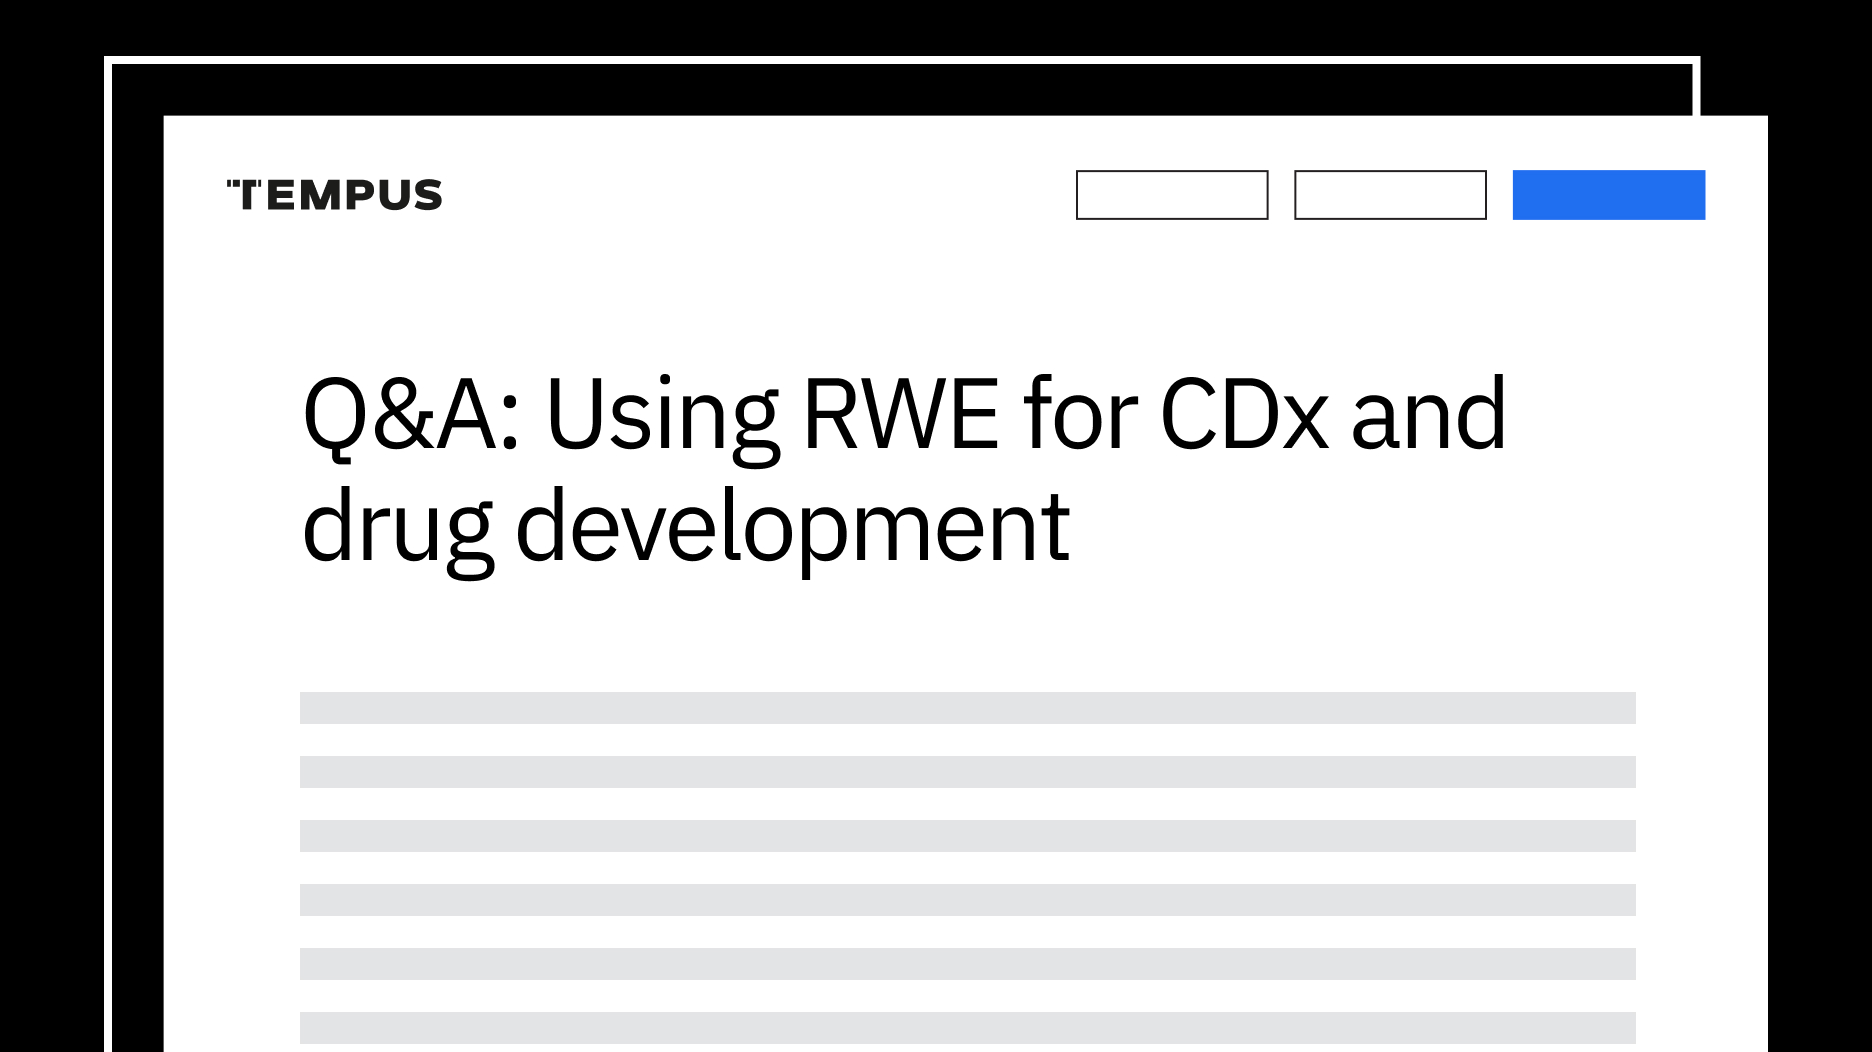 Q&A: Using RWE for CDx and drug development